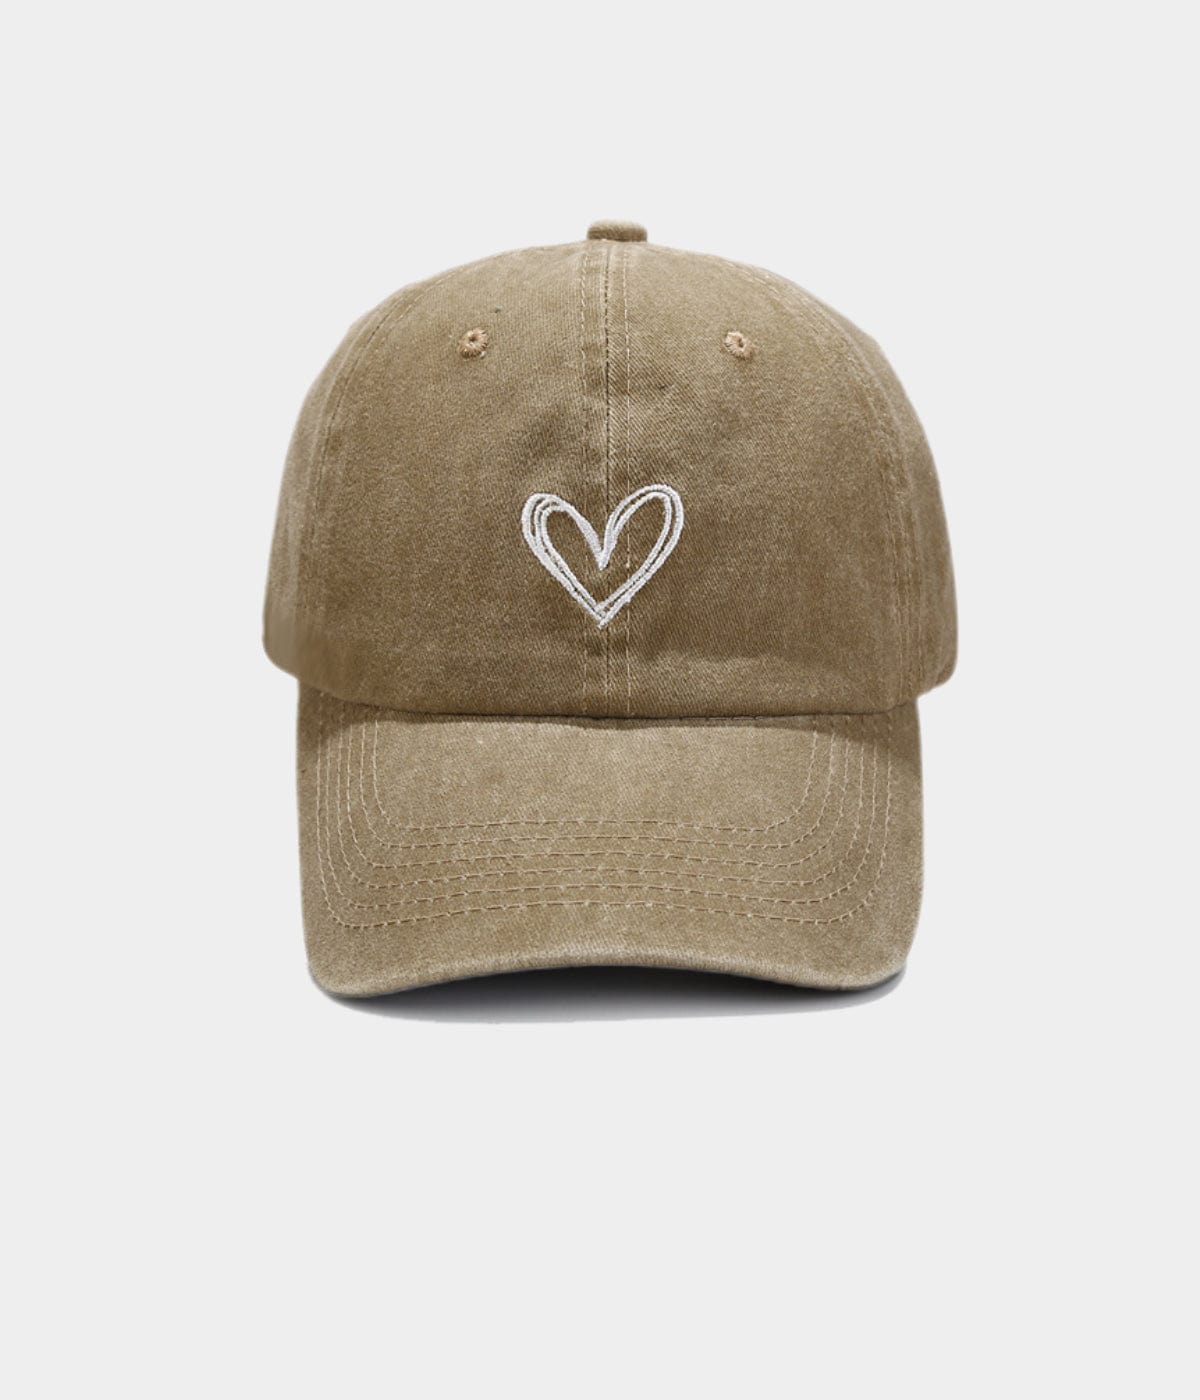 WASHED DRAWN HEART CAP. | High quality by CAPS Apparel